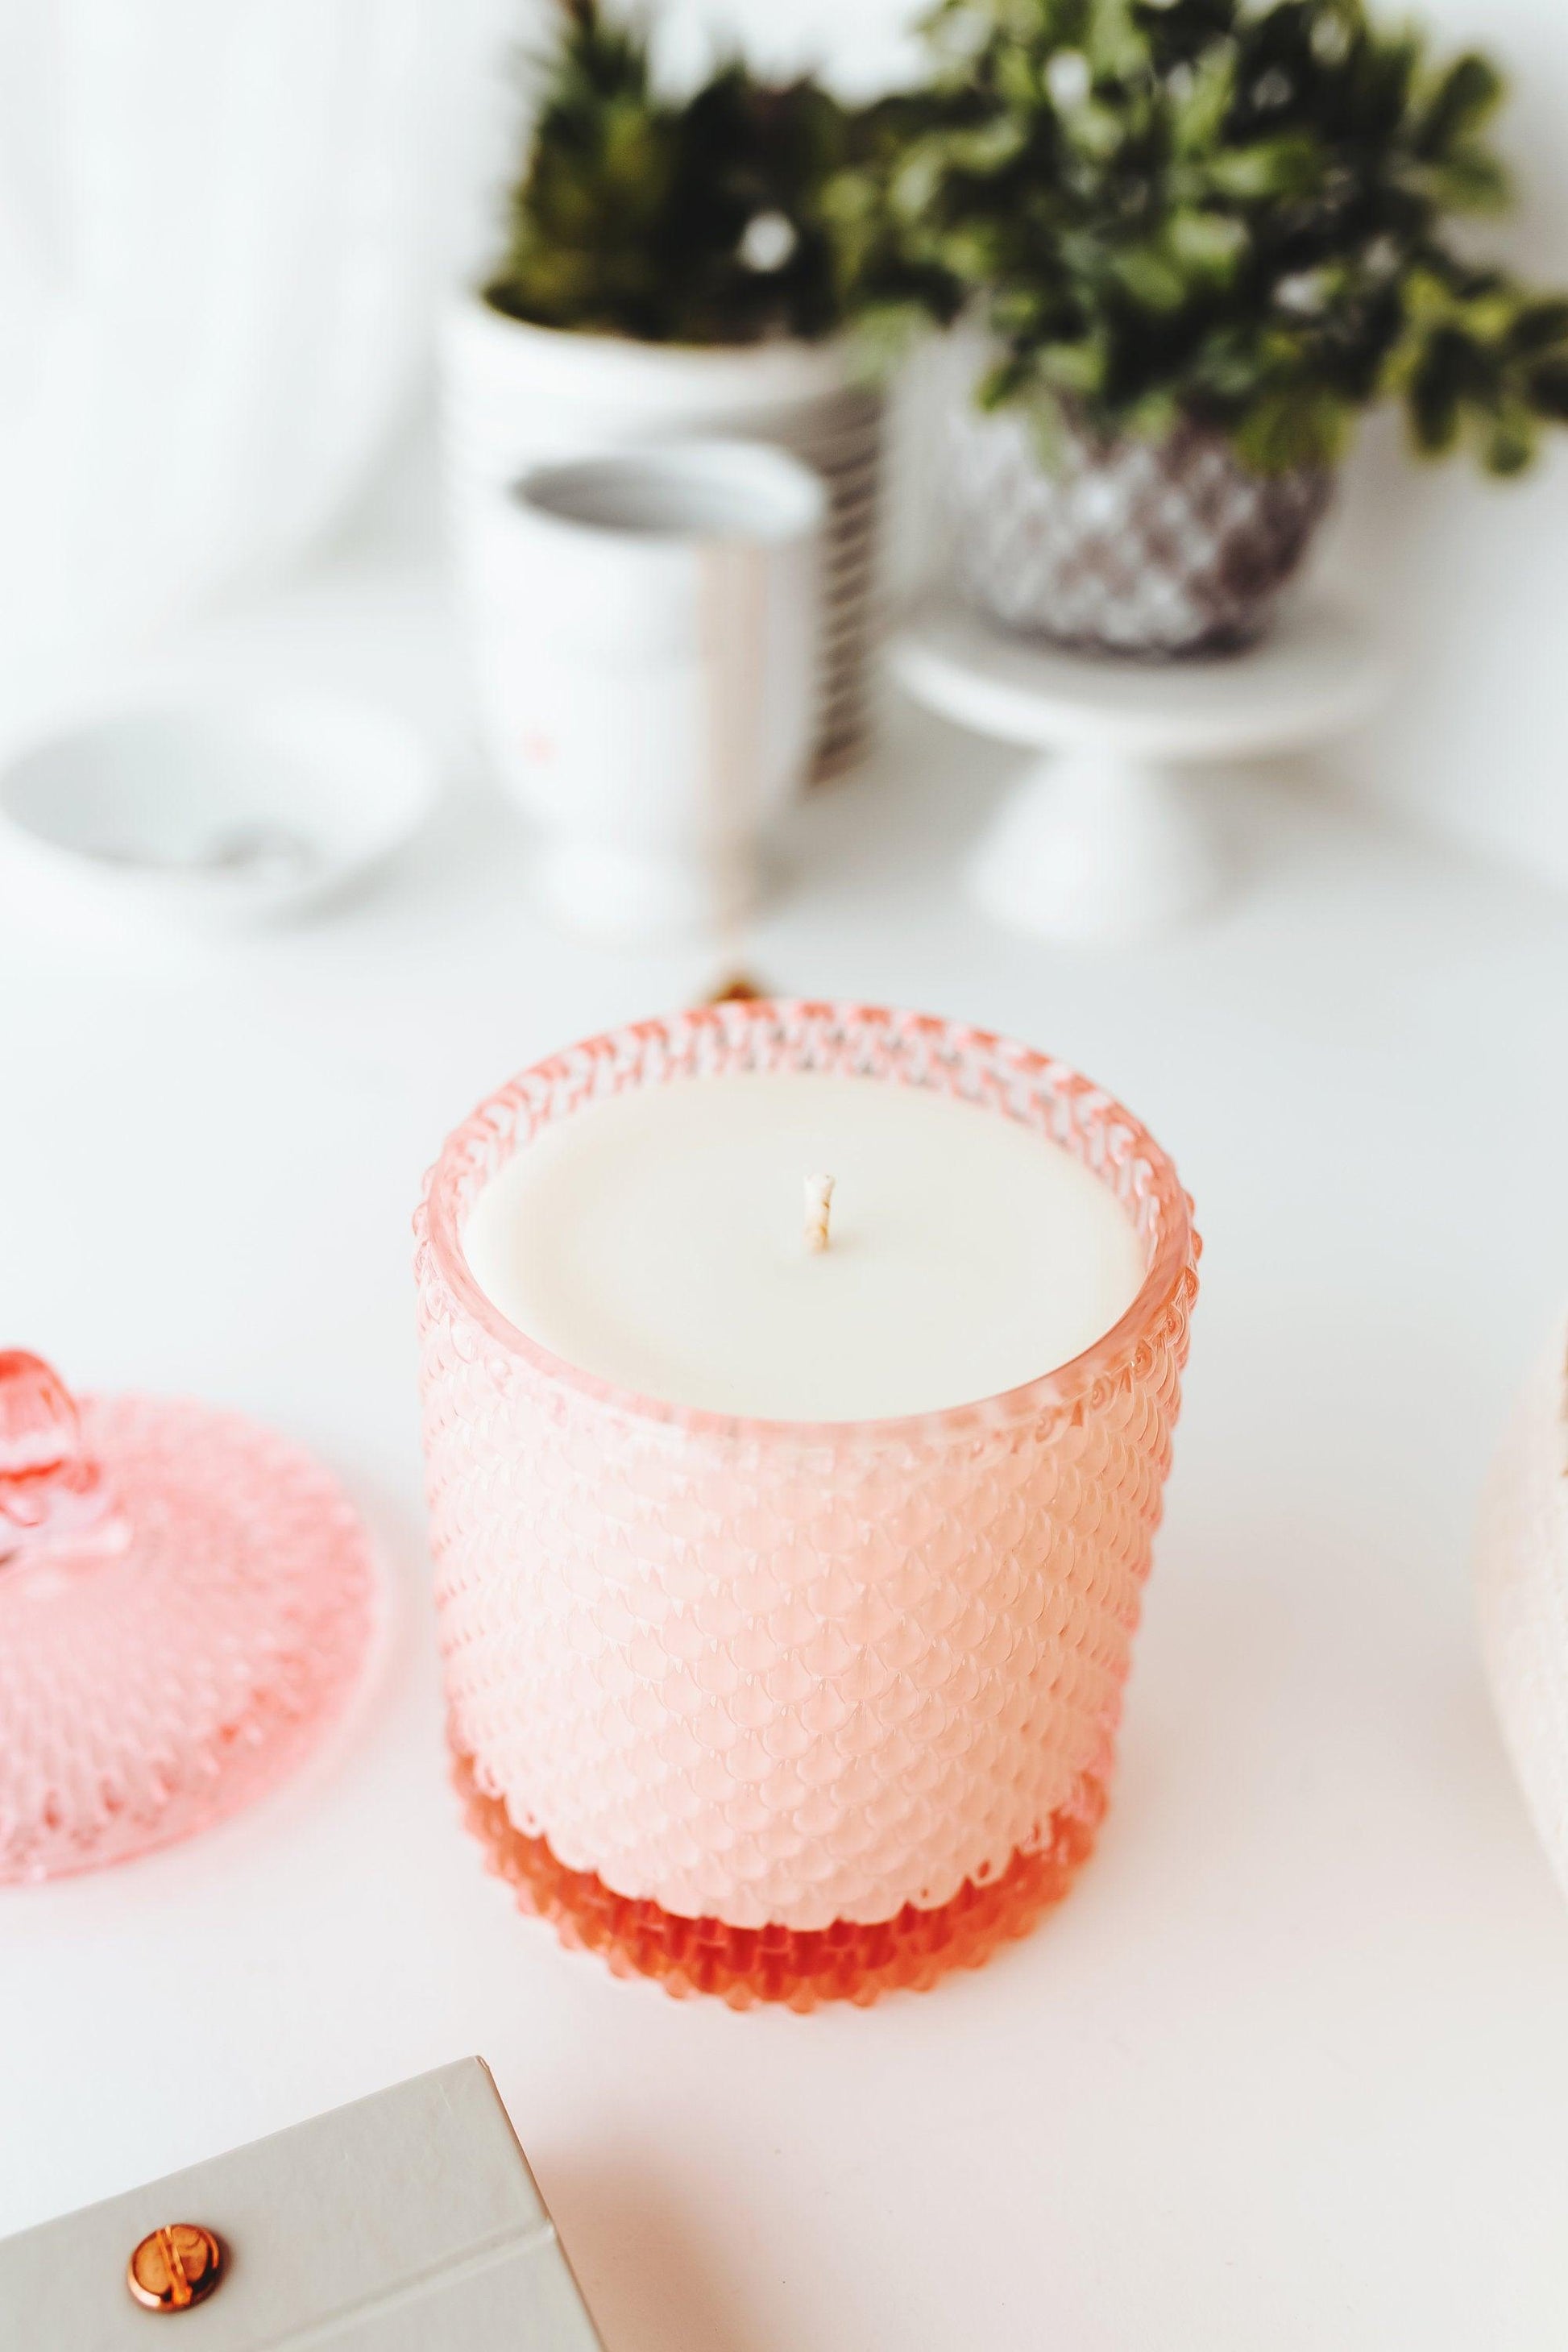 Scented Soy Candle in Vintage Inspired Jar - RetroWix 